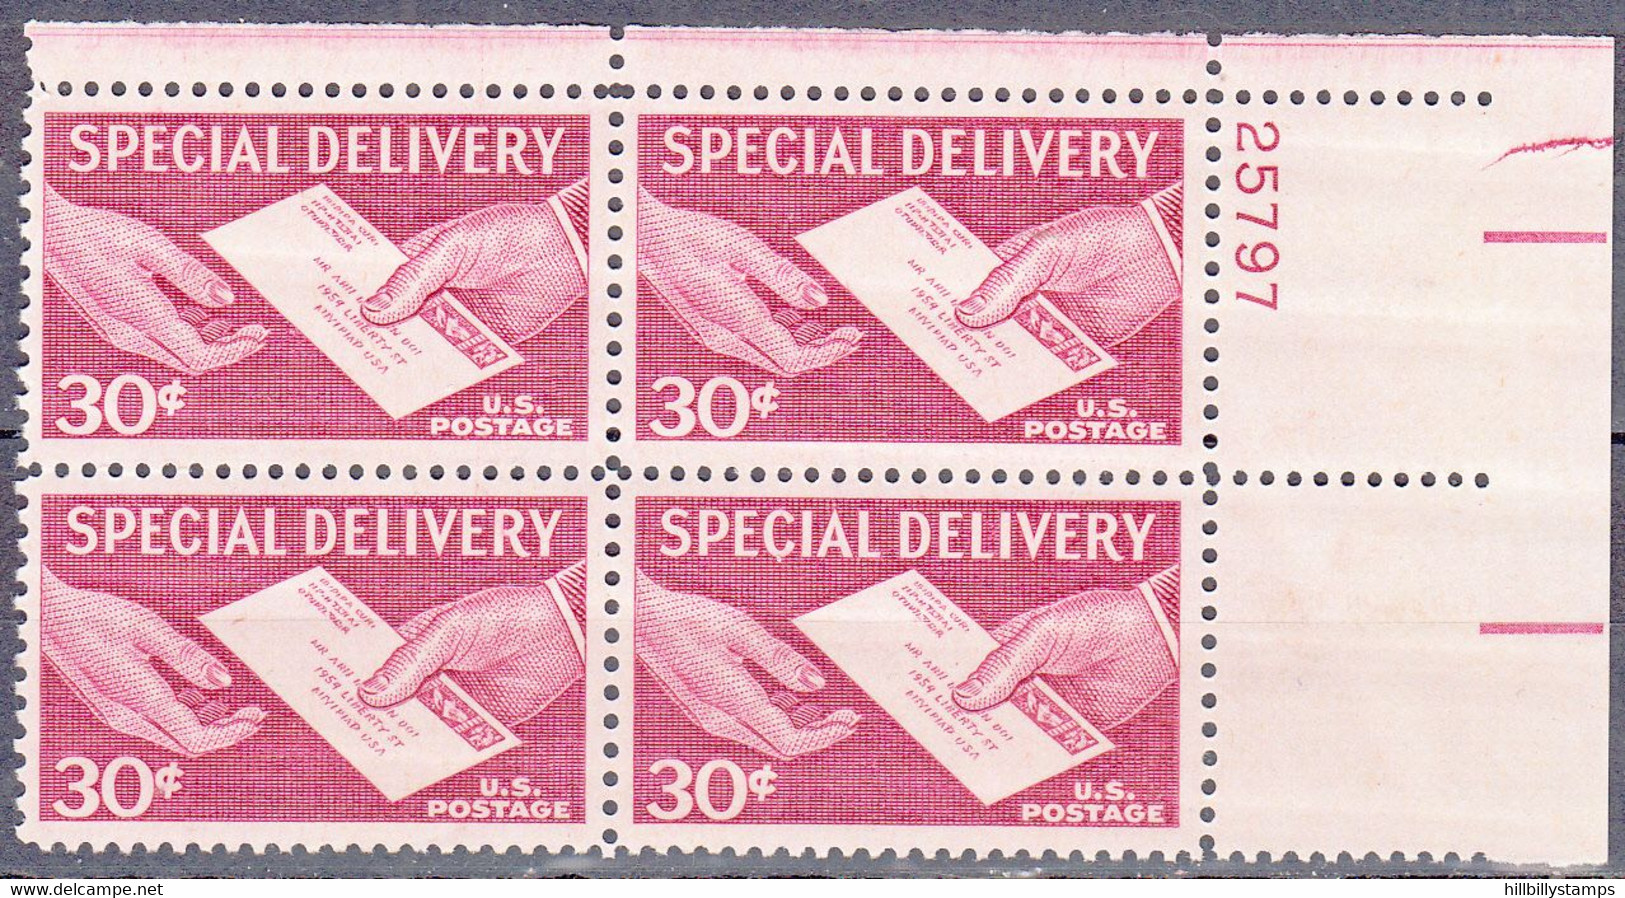 UNITED STATES    SCOTT NO E21   MNH   YEAR  1957  PLATE NUMBER BLOCK - Special Delivery, Registration & Certified